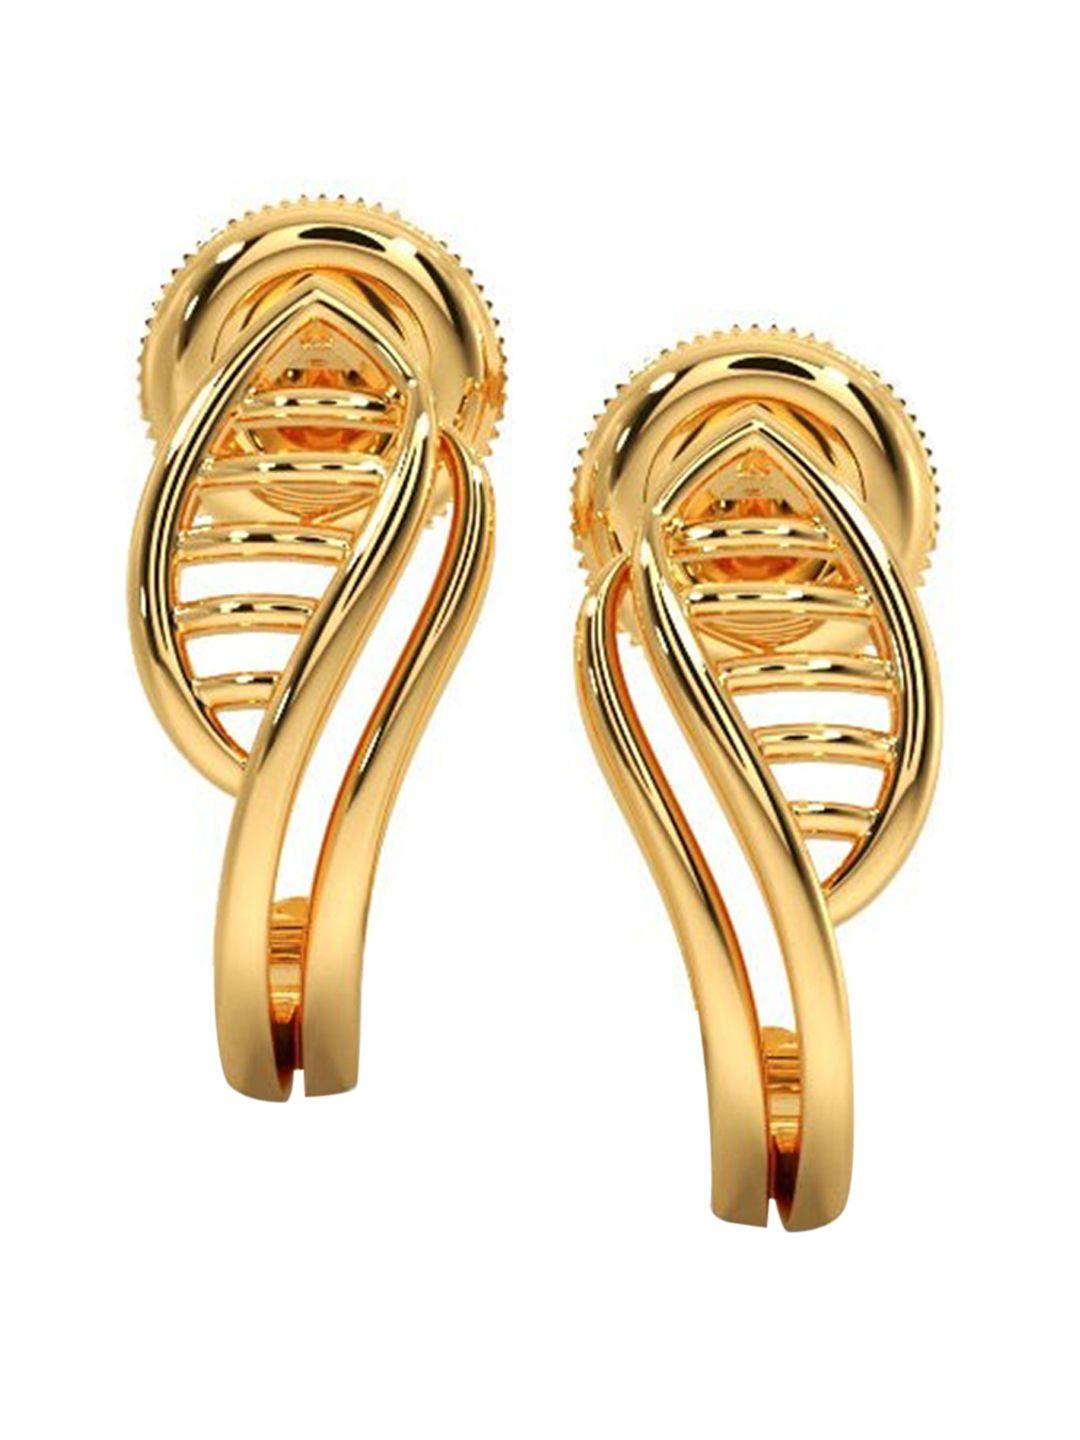 candere a kalyan jewellers company 18kt gold bis hallmark earrings-2.4gm